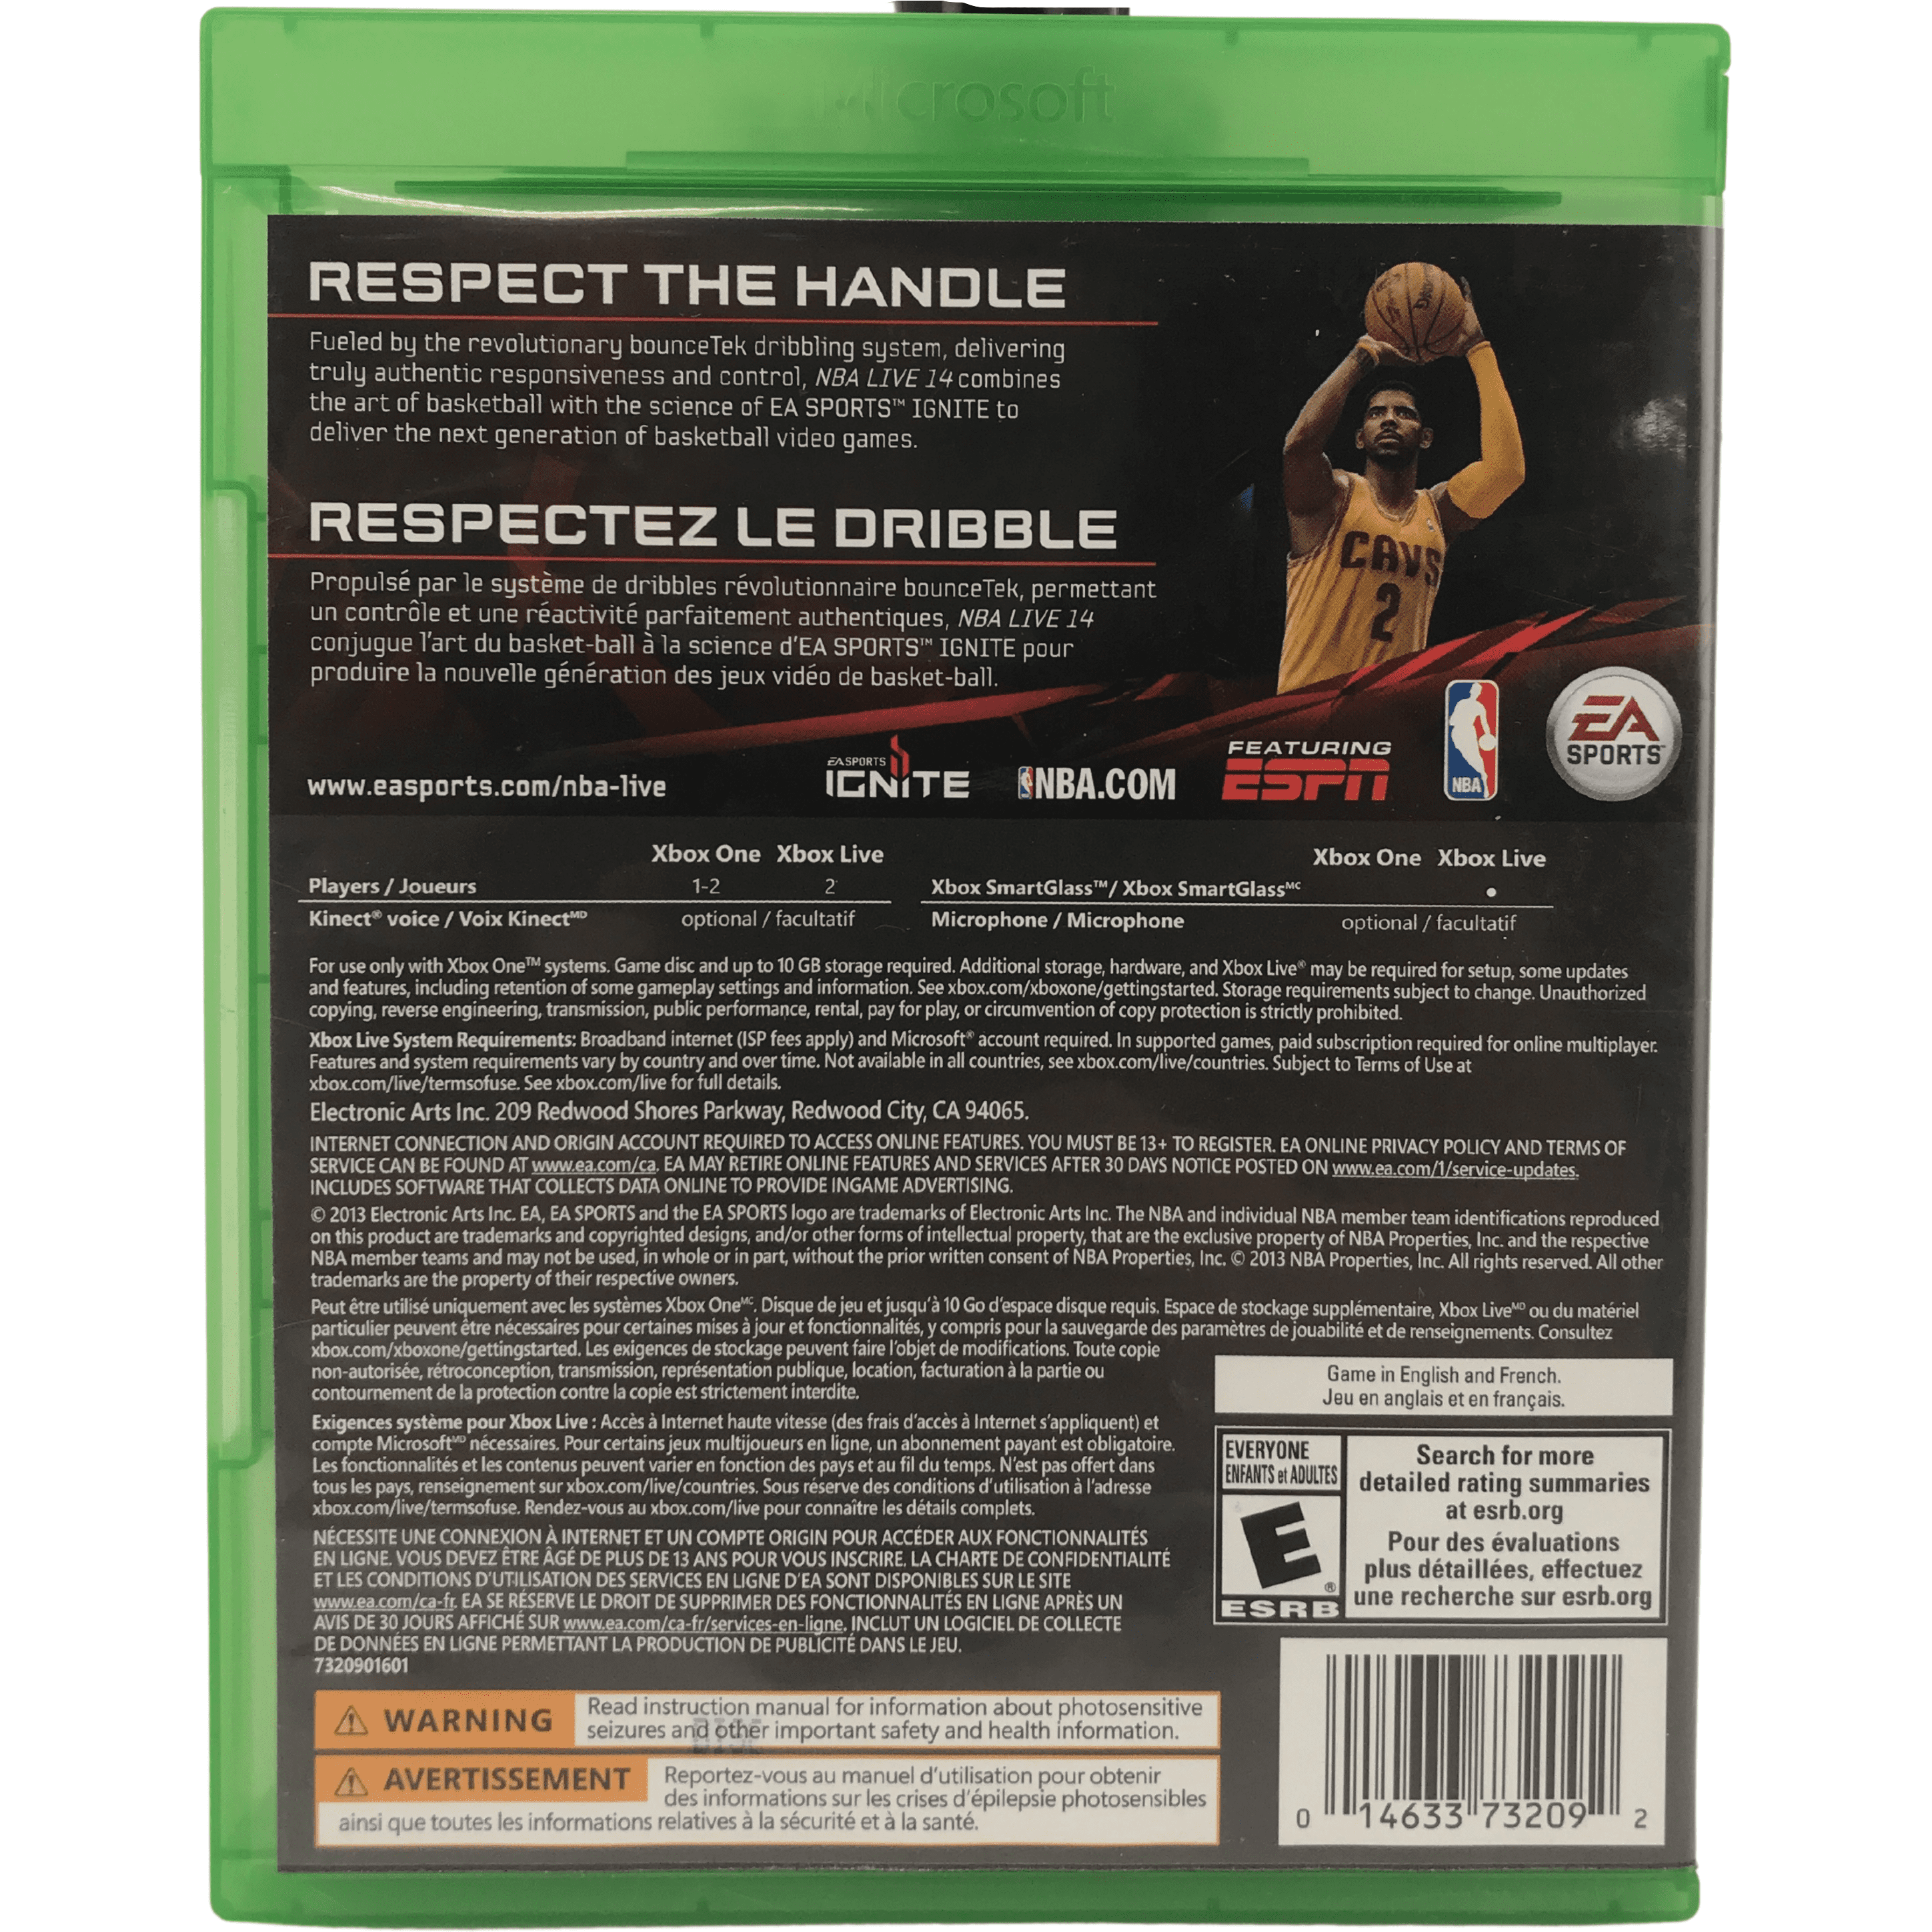 Xbox One "NBA Live 14" Game: Video Game: Opened